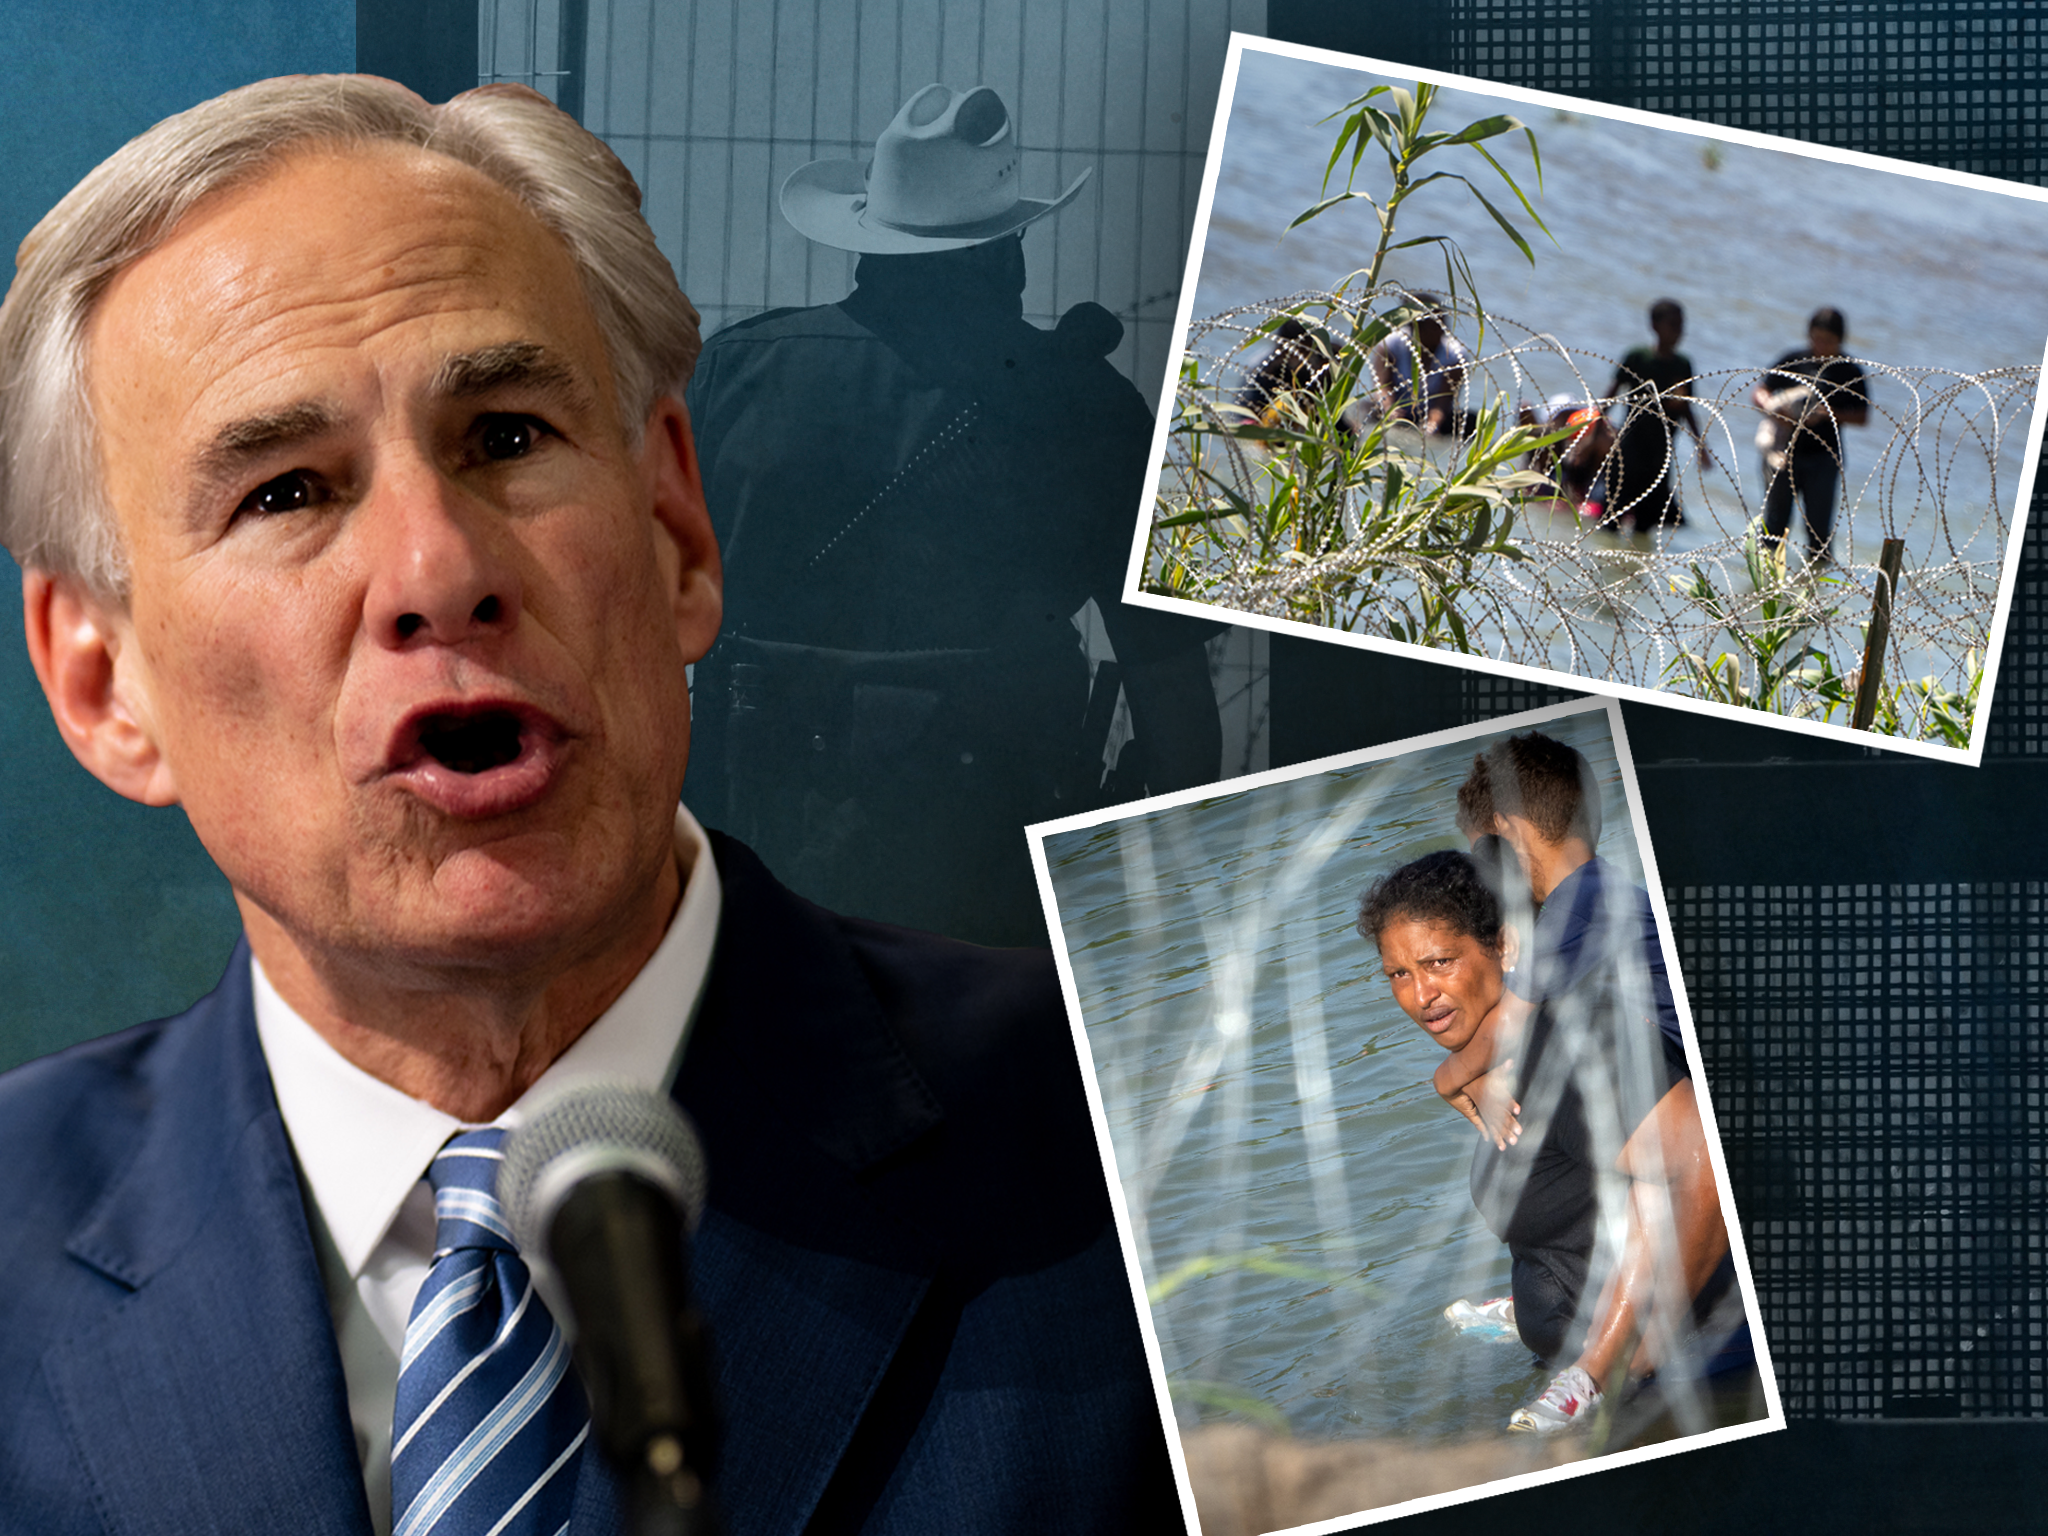 Greg Abbott has declared a variety of emergency powers at the border